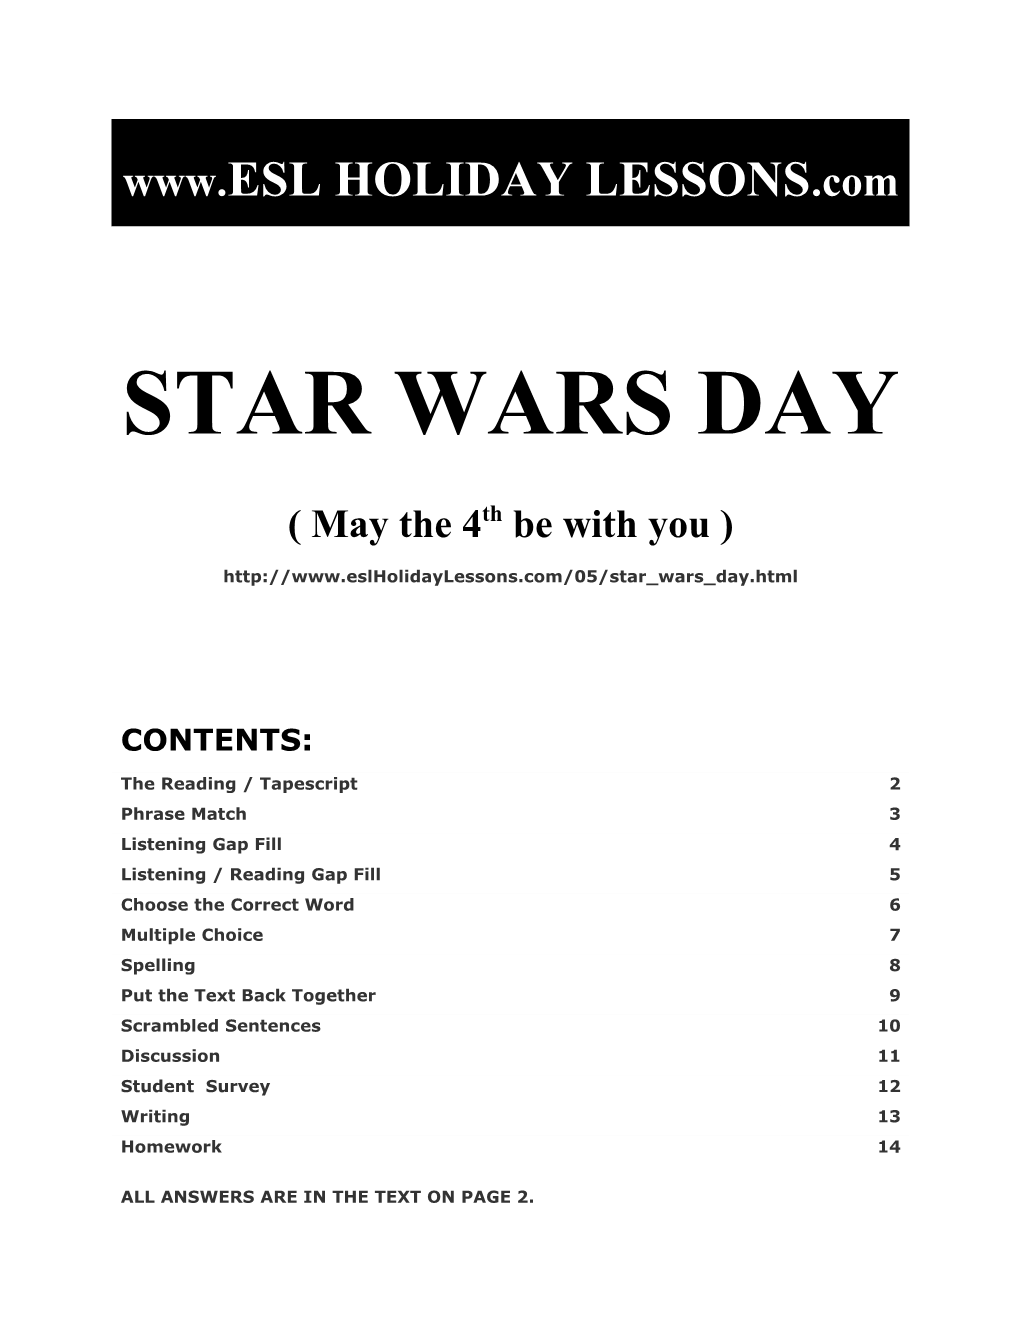 Holiday Lessons - Star Wars Day